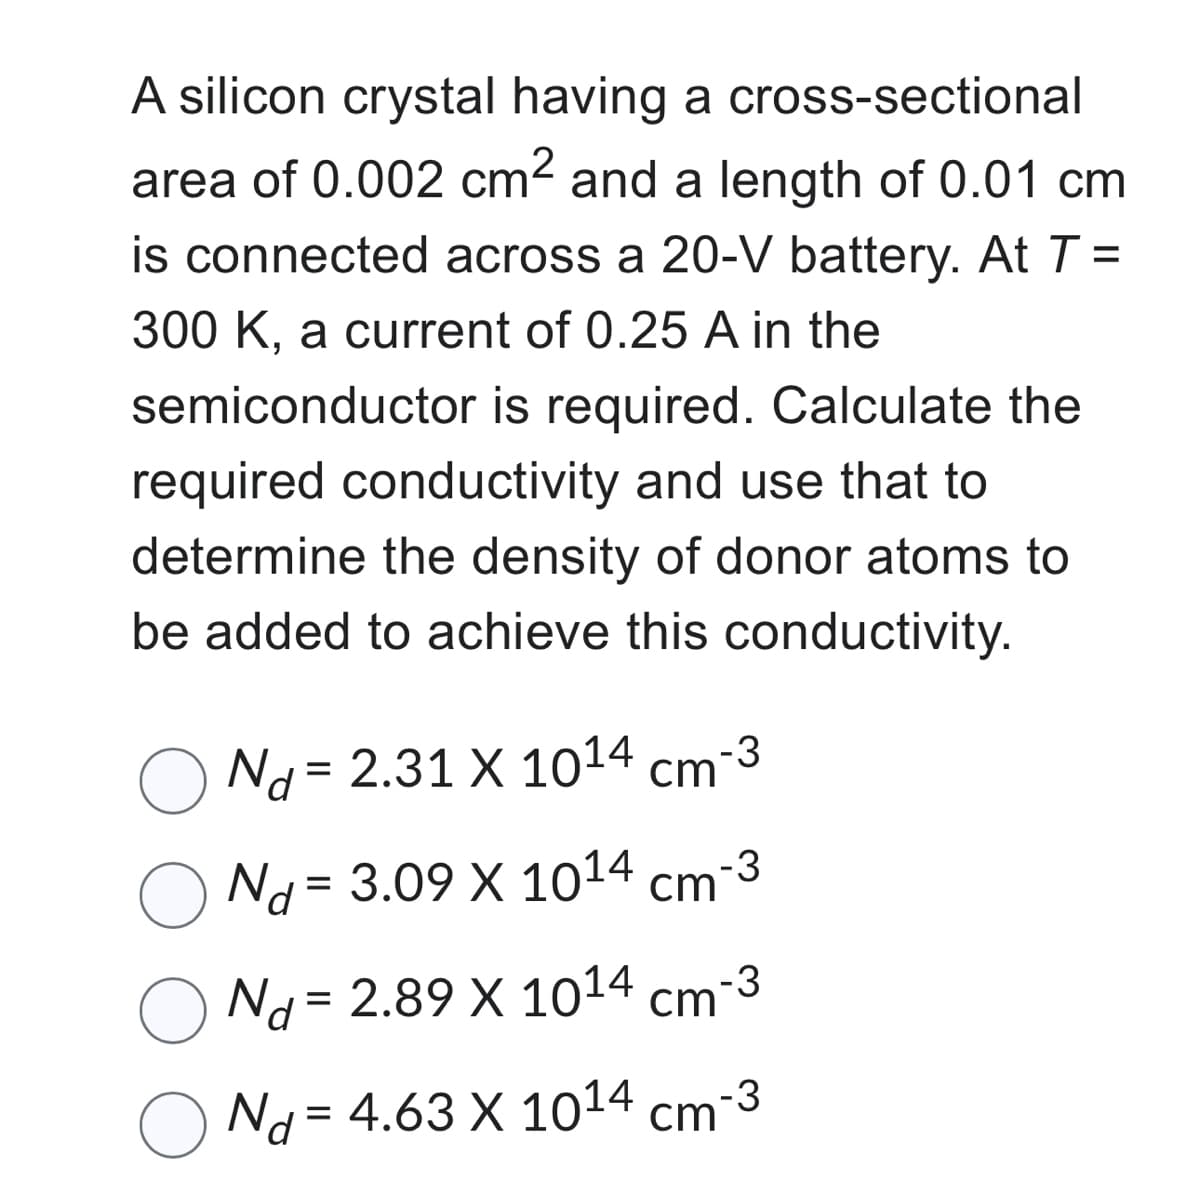 A silicon crystal having a cross-sectional
area of 0.002 cm² and a length of 0.01 cm
is connected across a 20-V battery. At T =
300 K, a current of 0.25 A in the
semiconductor is required. Calculate the
required conductivity and use that to
determine the density of donor atoms to
be added to achieve this conductivity.
Nd= 2.31 X 1014 cm-3
Nd = 3.09 X 1014 cm
-3
Nd= 2.89 X 1014 cm-3
Nd=4.63 X 10¹4 cm-3